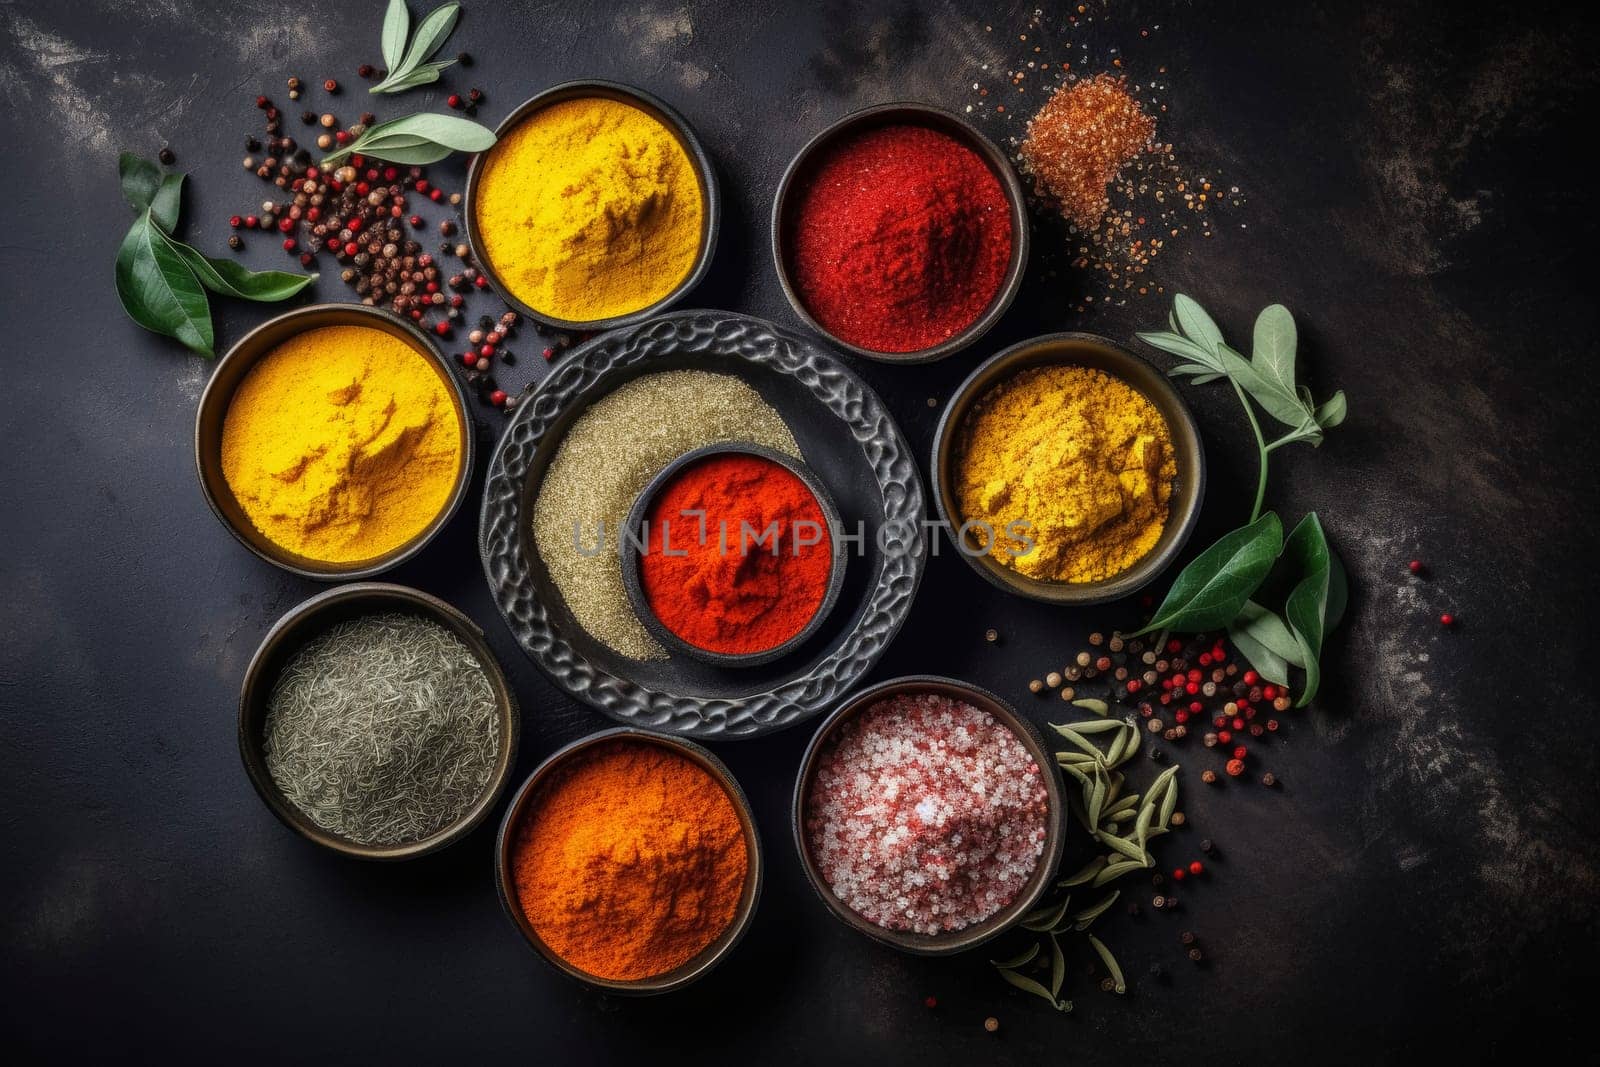 Variety of colorful spices displayed in small bowls.